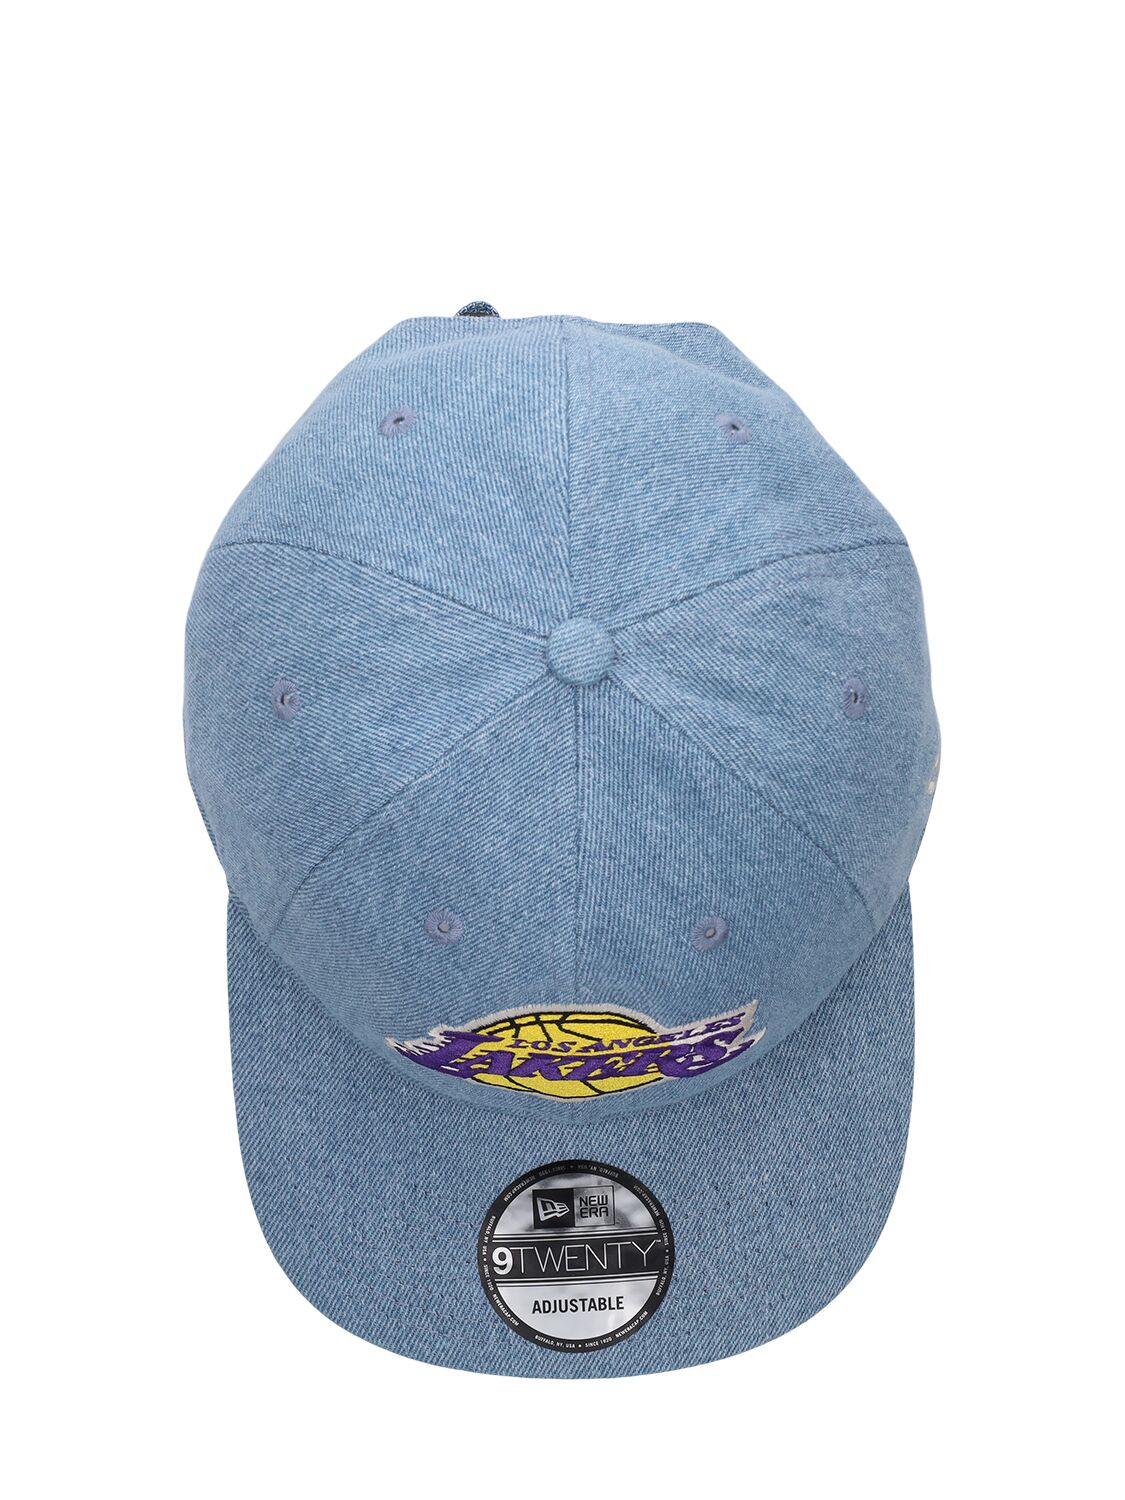 WASHED DENIM LOS ANGELES LAKERS棒球帽